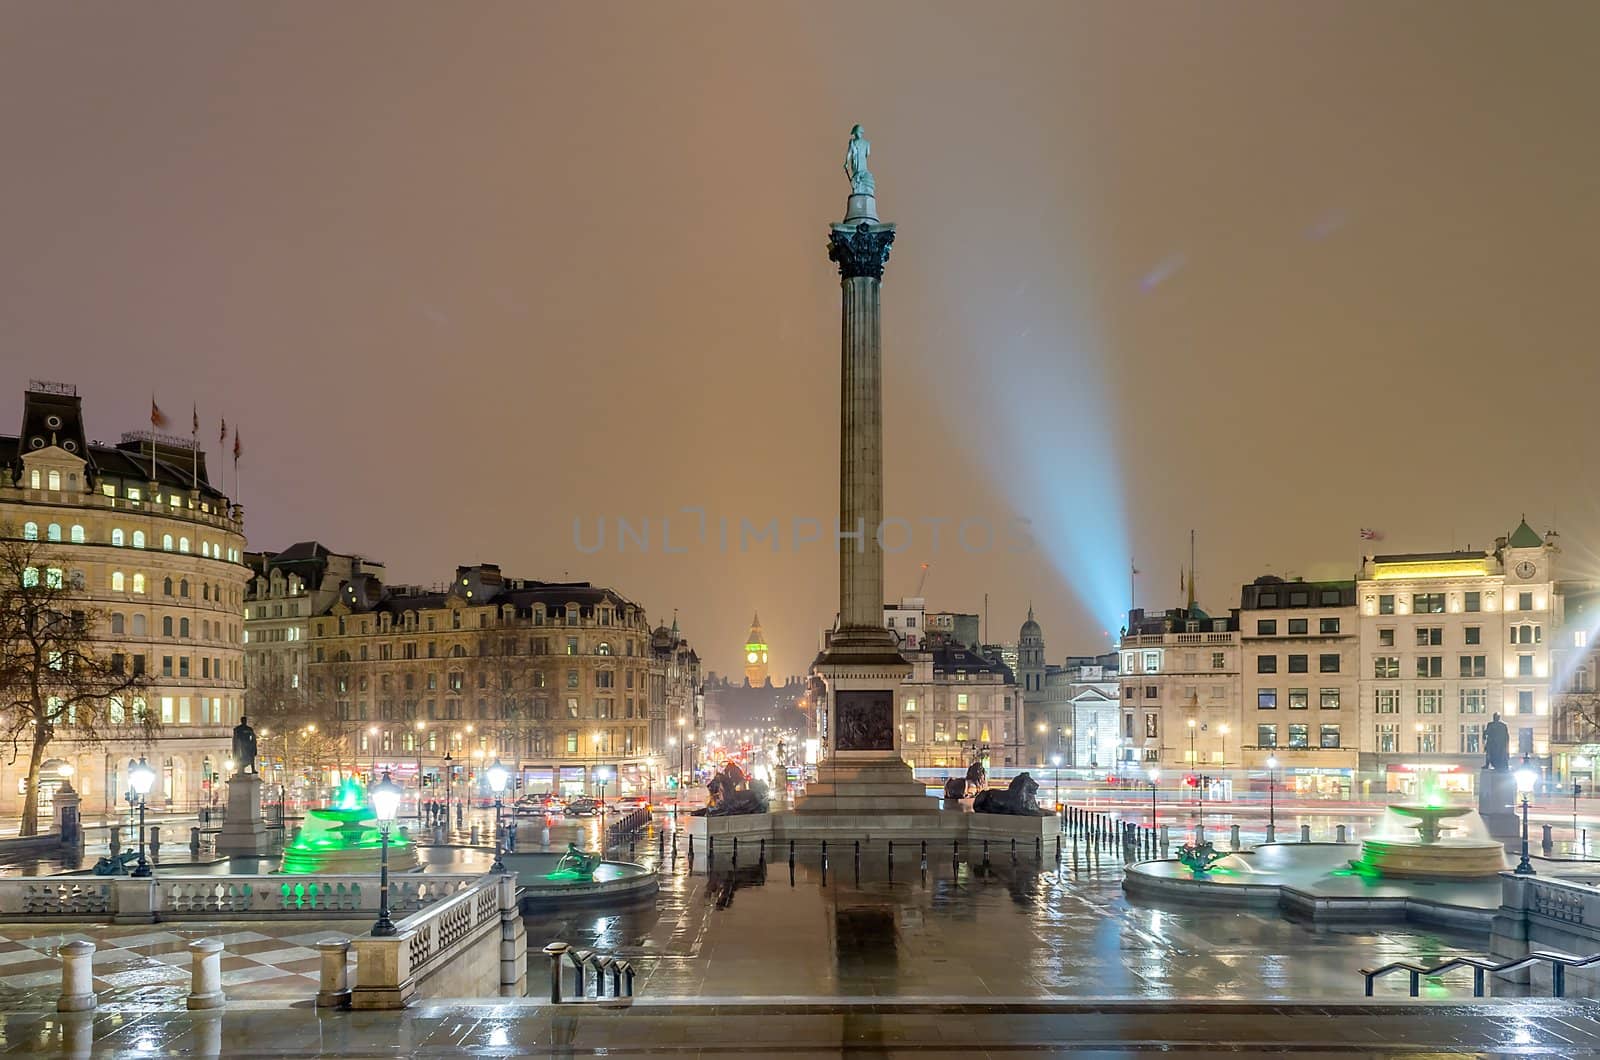 Trafalgar Square at night with the Big Ben on the background, London, UK